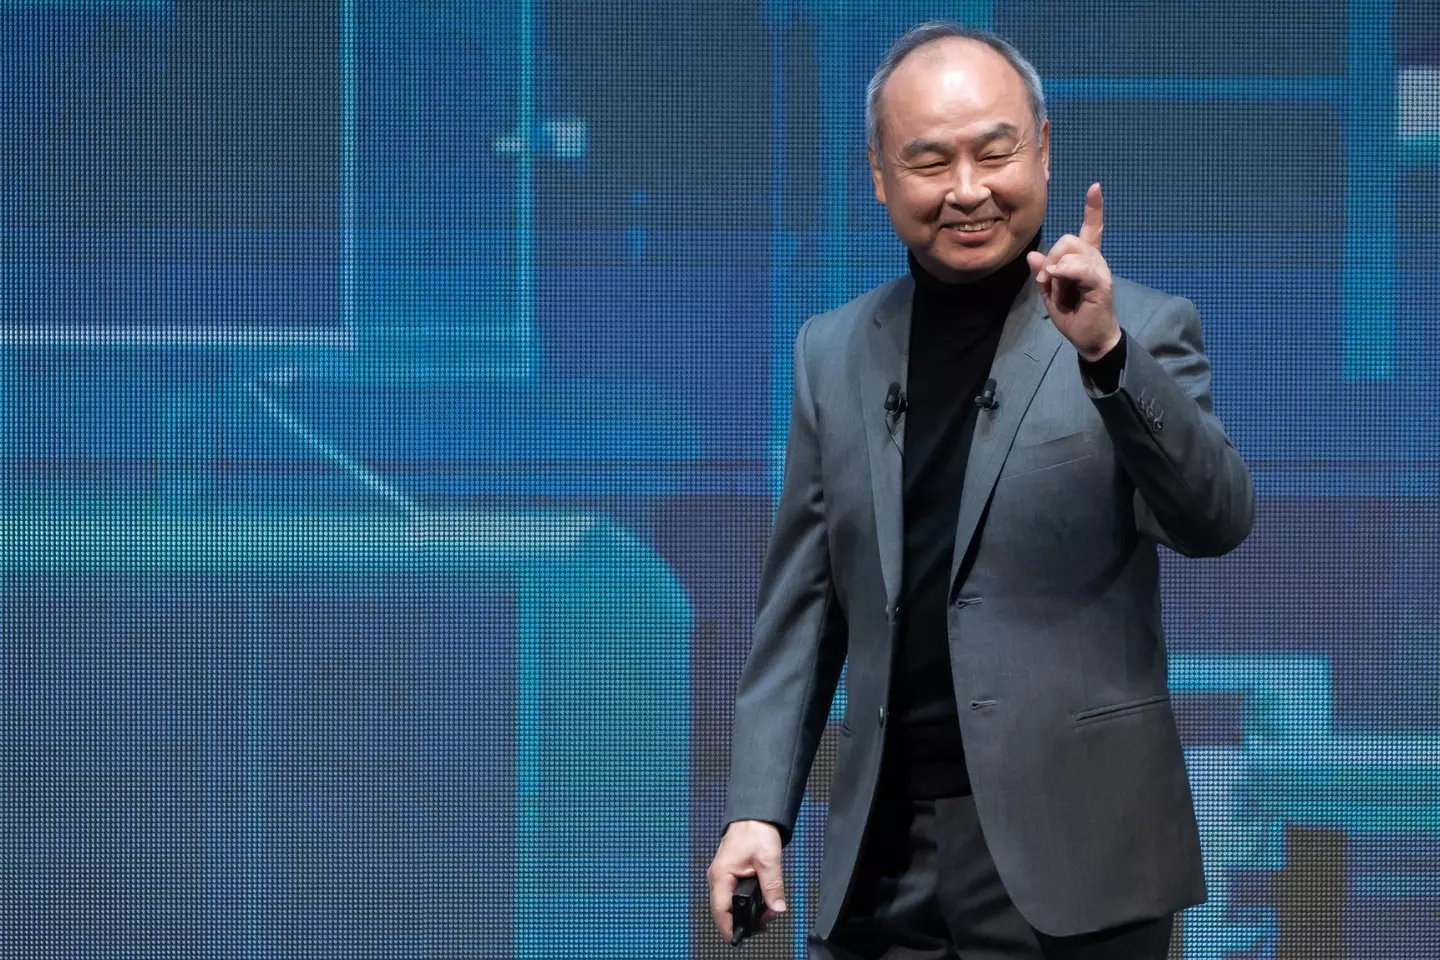 Masayoshi Son has lost more money than we could ever imagine.